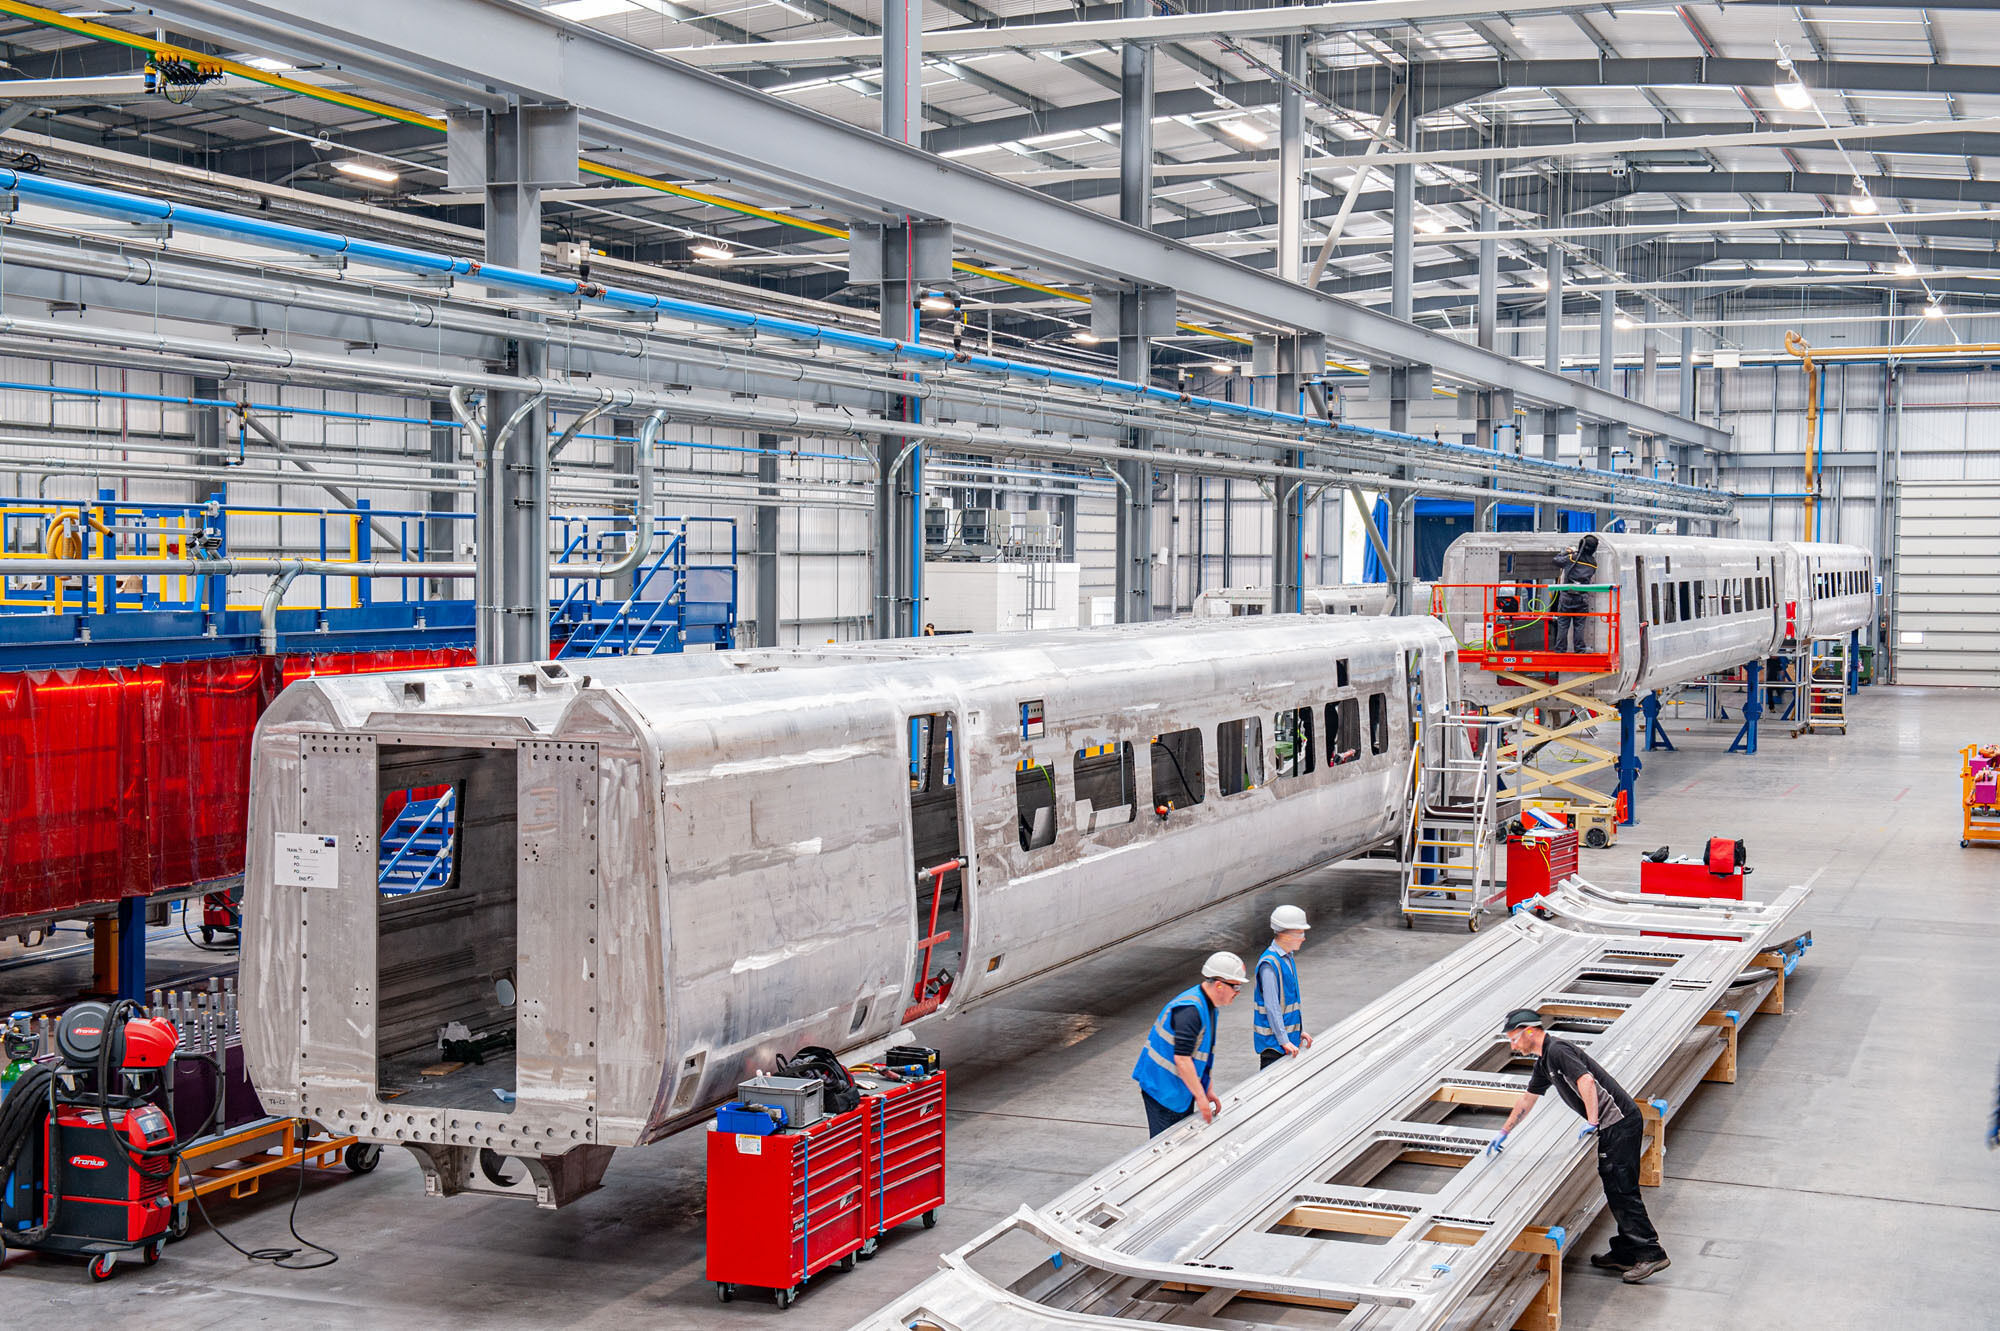 Atlas Copco compressed air/argon pipework system plays a vital role in Hitachi Rail’s new £8.5 million UK welding and painting facility